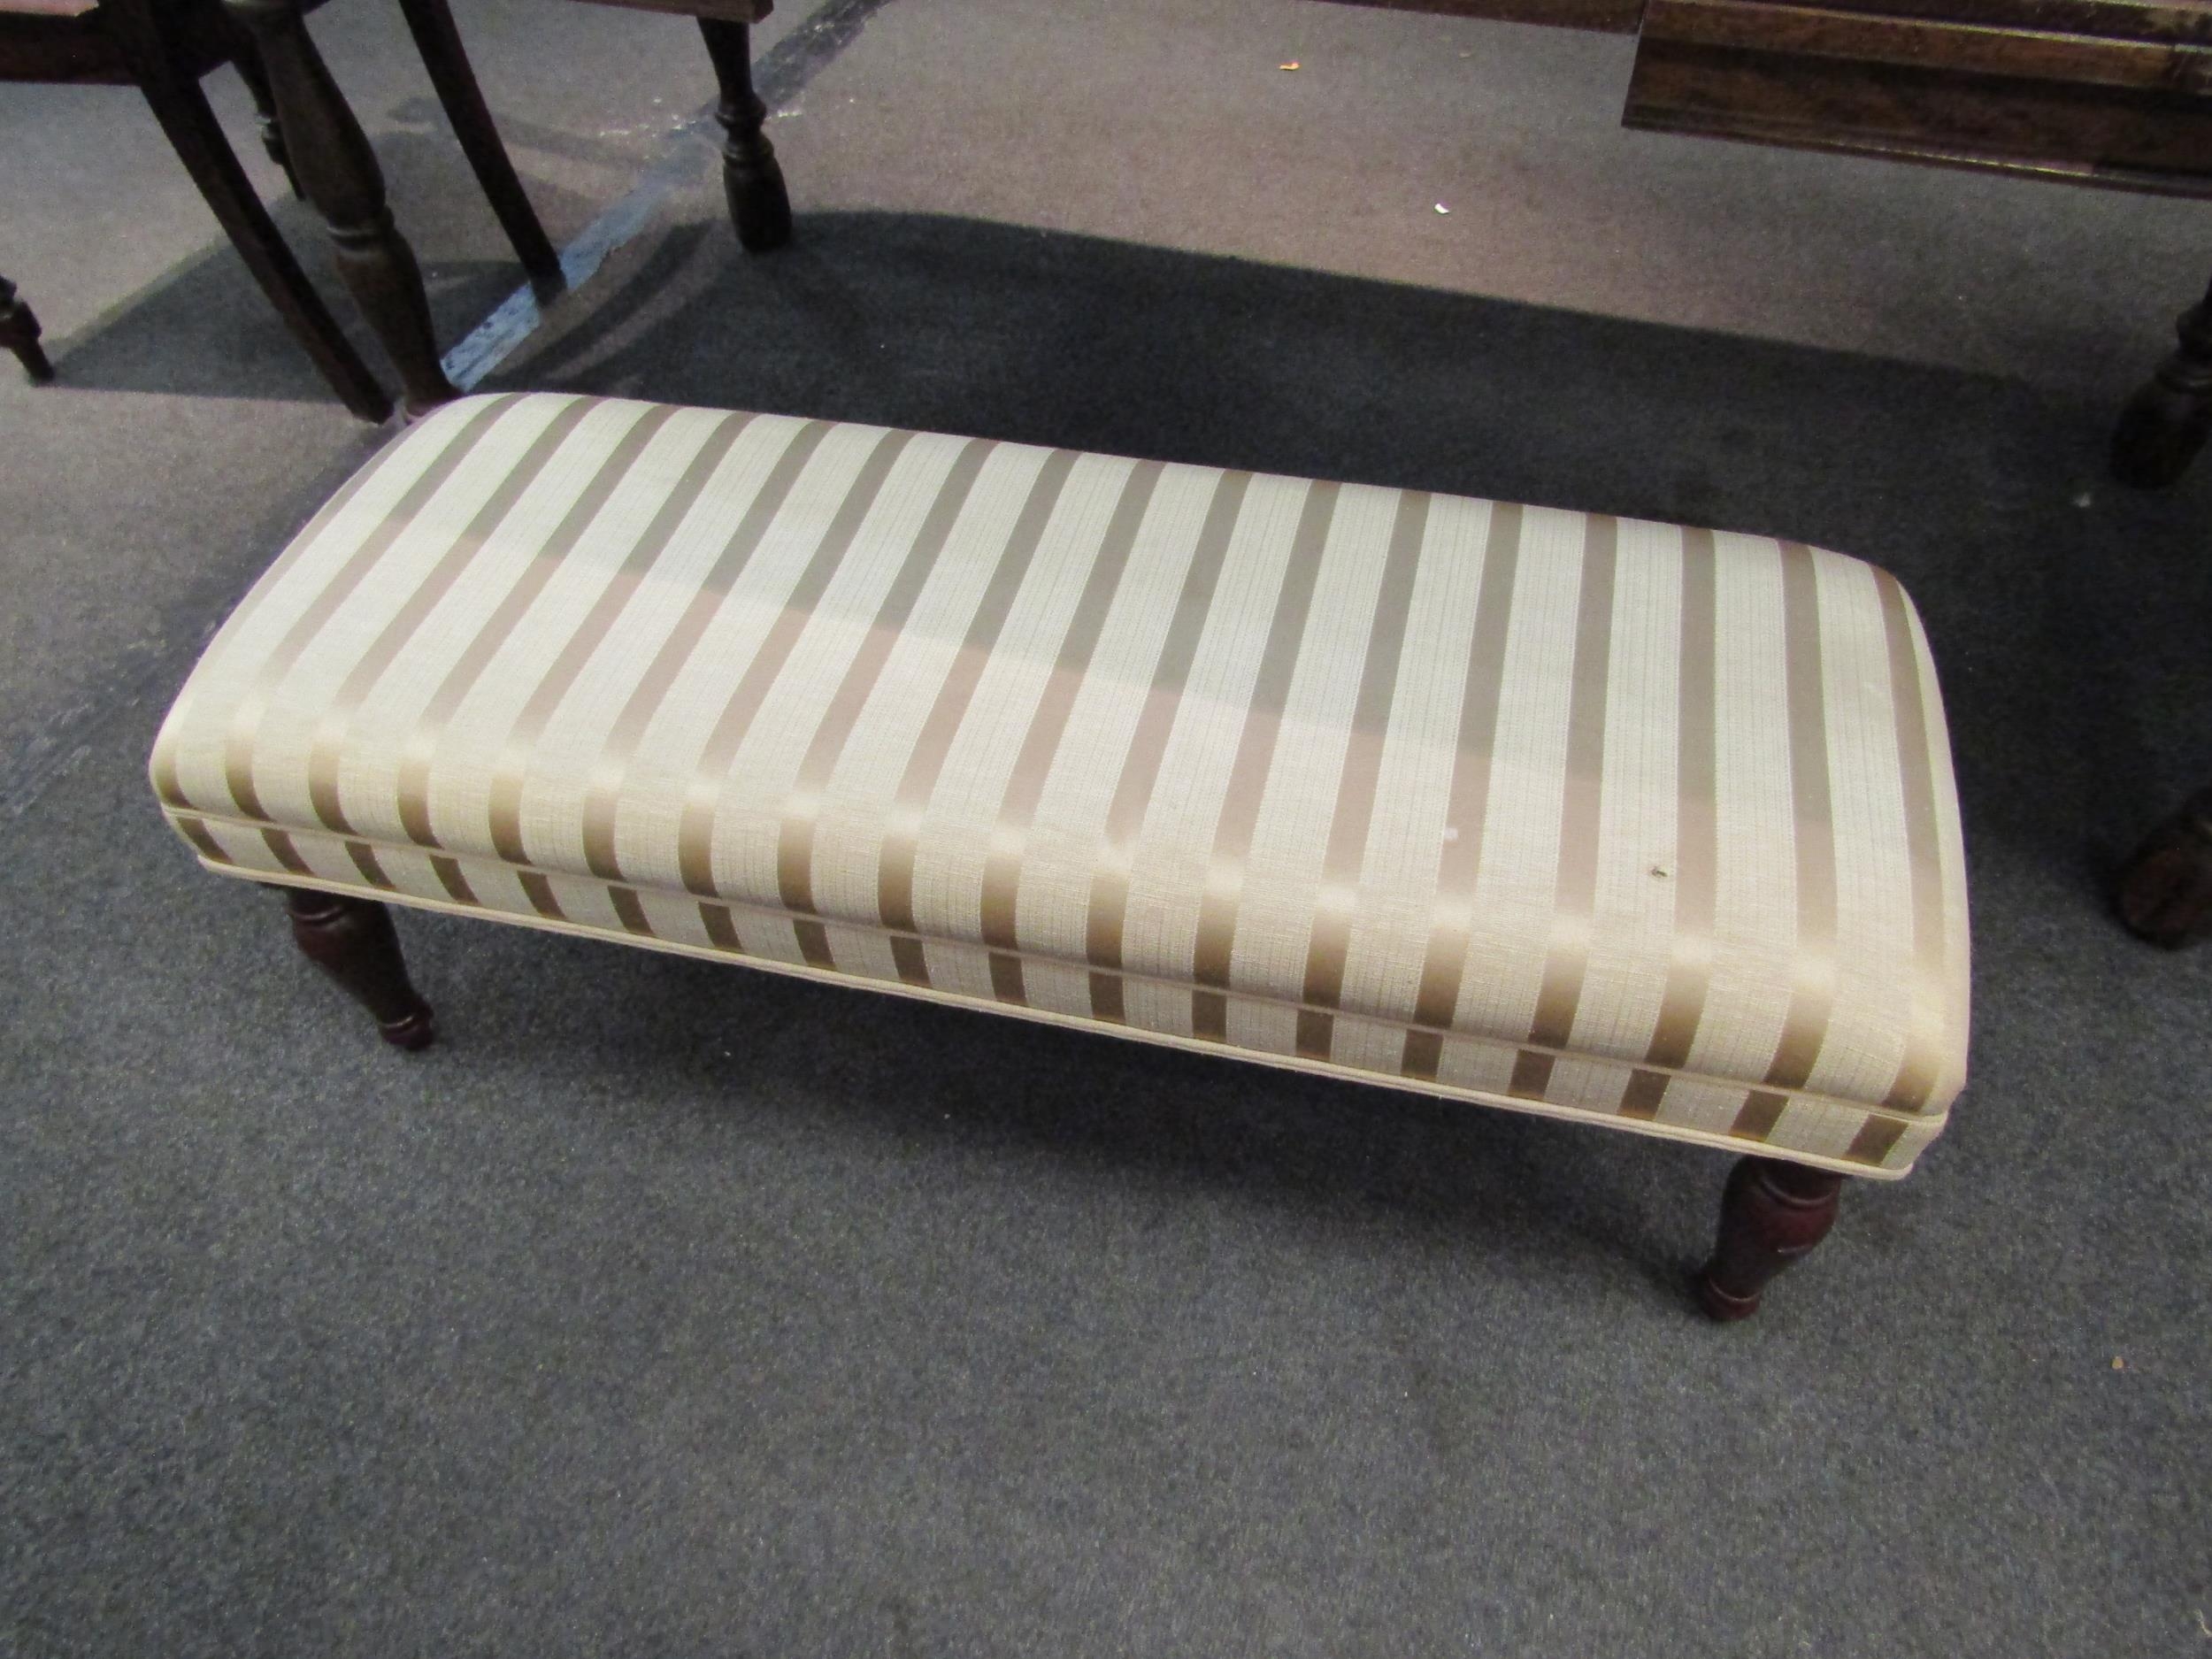 A Victorian style long footstool with Regency stripe upholstery, 36cm high x 106cm long